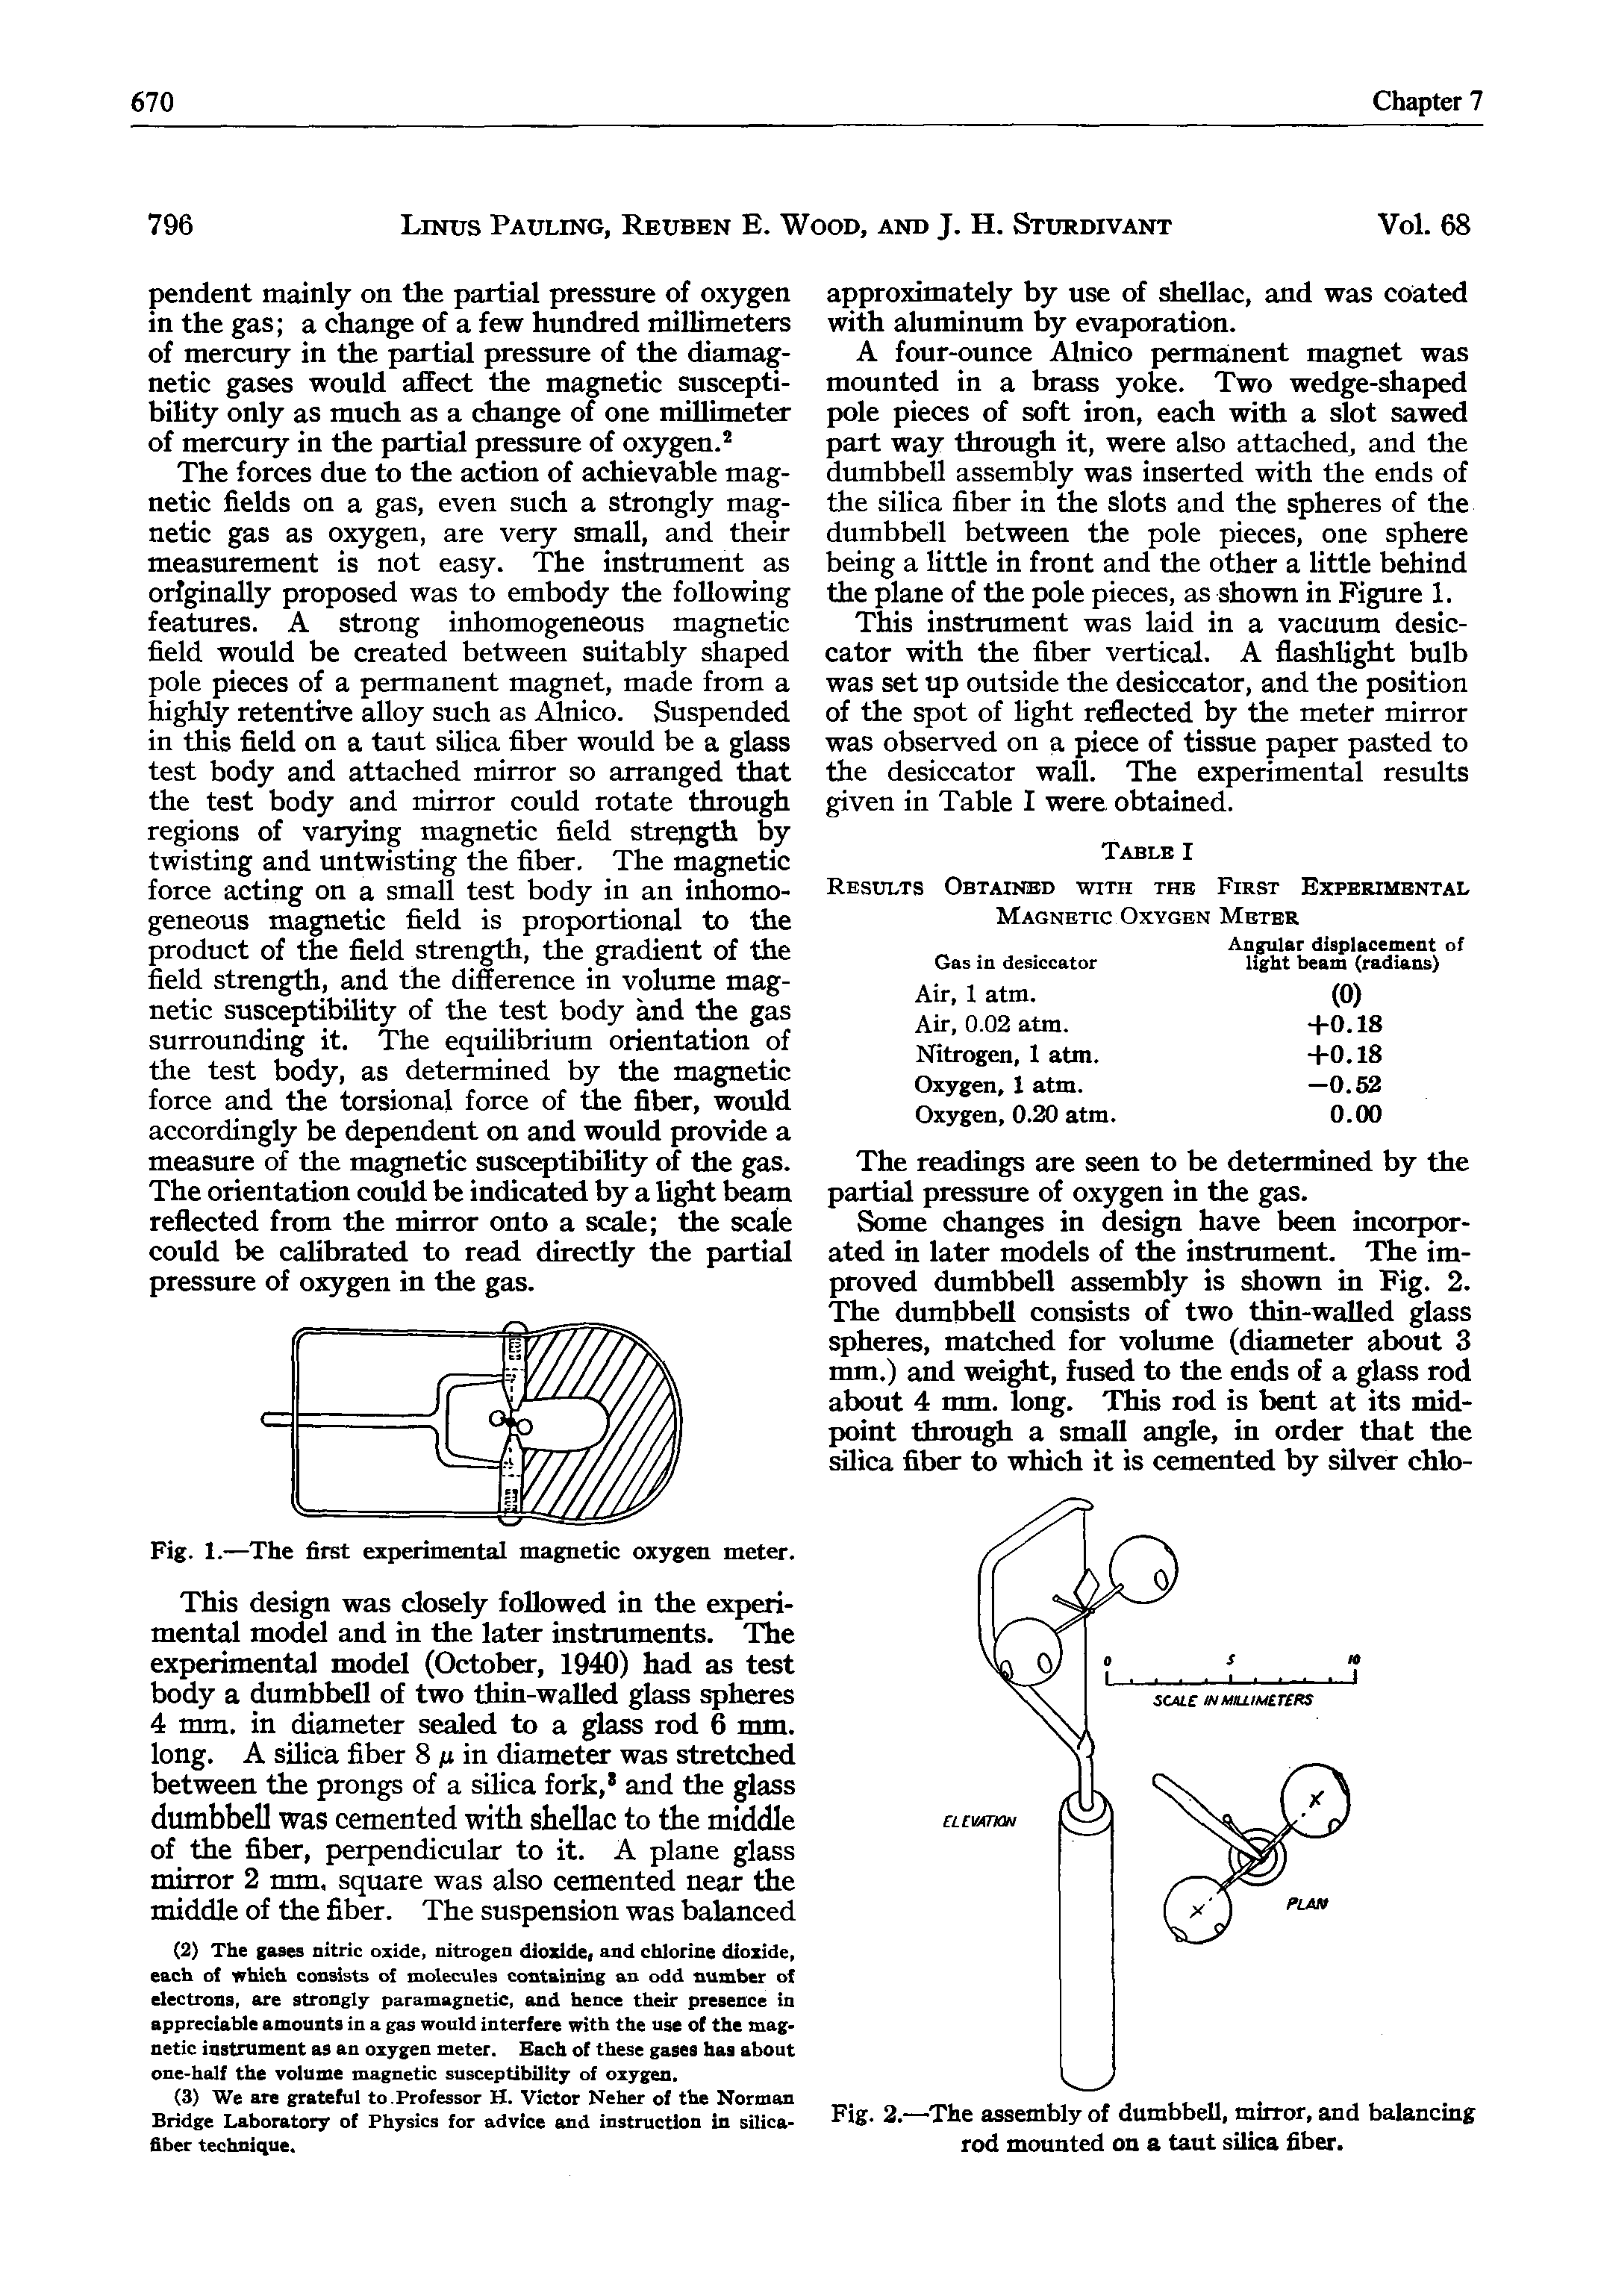 Fig. 2.—The assembly of dumbbell, mirror, and balancing rod mounted on a taut silica fiber.